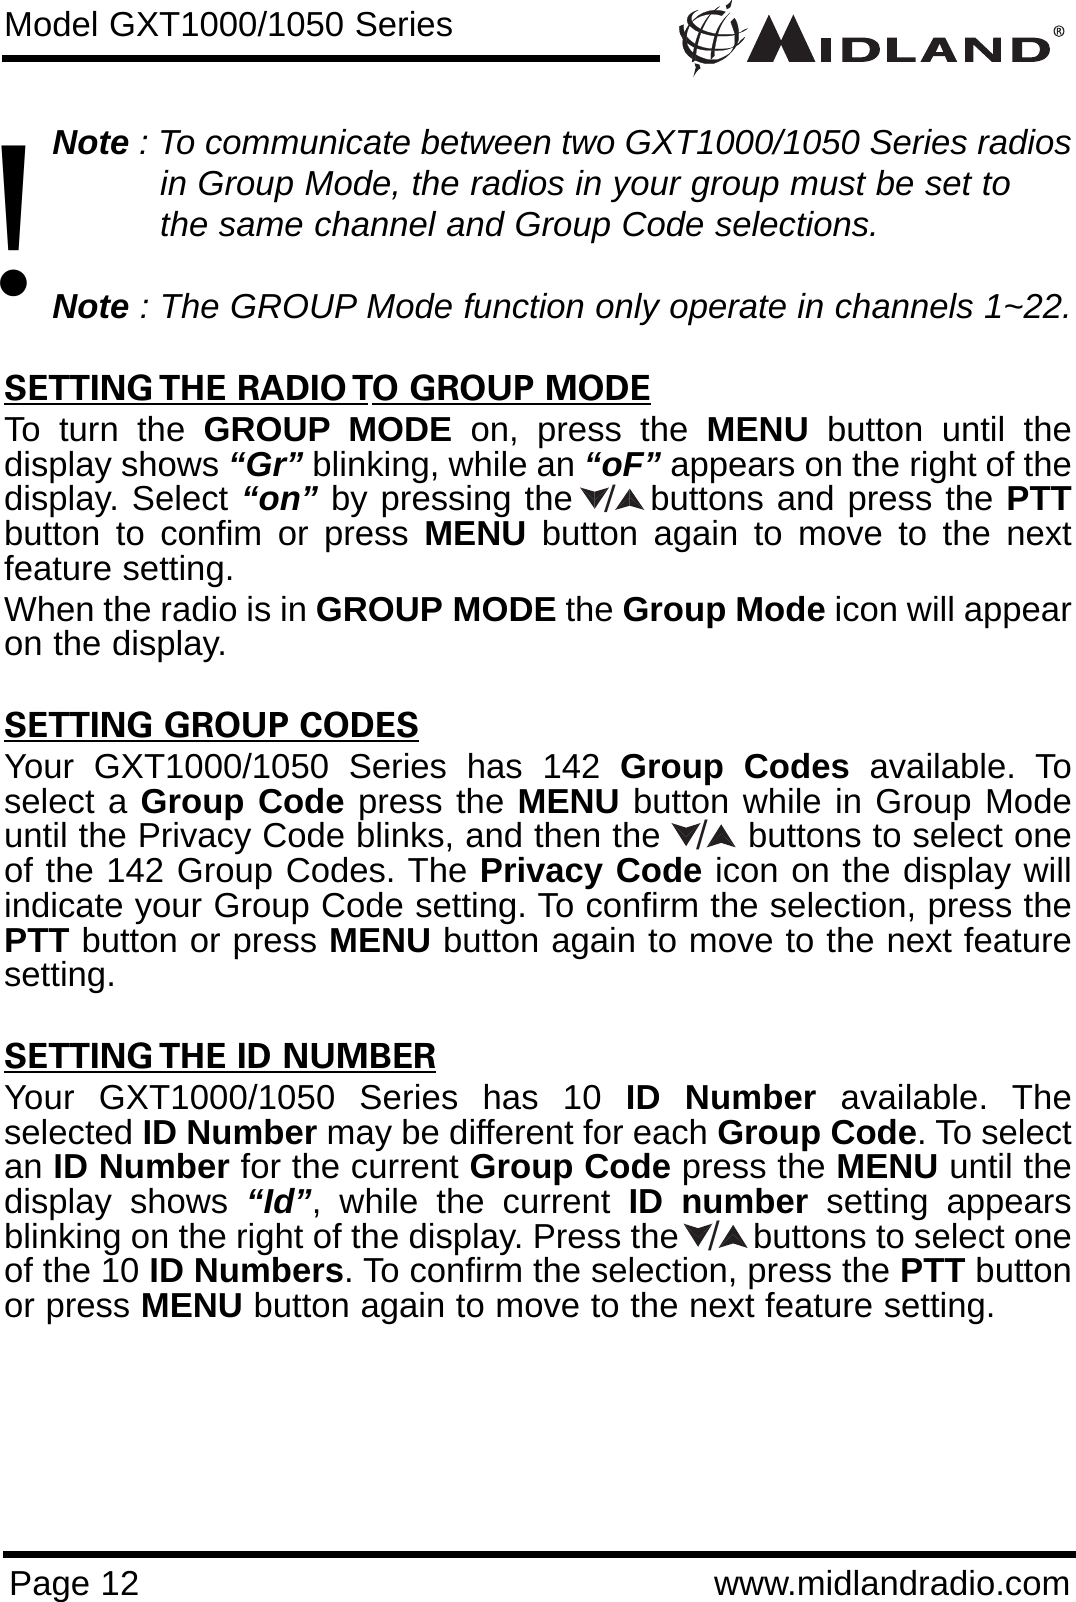 Page 12 www.midlandradio.comNote : To communicate between two GXT1000/1050 Series radios in Group Mode, the radios in your group must be set to the same channel and Group Code selections.Note : The GROUP Mode function only operate in channels 1~22.SETTING THE RADIO TO GROUP MODETo turn the GROUP MODE on, press the MENU button until thedisplay shows “Gr” blinking, while an “oF” appears on the right of thedisplay. Select “on” by pressing the      buttons and press the PTTbutton to confim or press MENU button again to move to the nextfeature setting. When the radio is in GROUP MODE the Group Mode icon will appearon the display.SETTING GROUP CODESYour GXT1000/1050 Series has 142 Group Codes available. Toselect a Group Code press the MENU button while in Group Modeuntil the Privacy Code blinks, and then the        buttons to select oneof the 142 Group Codes. The Privacy Code icon on the display willindicate your Group Code setting. To confirm the selection, press thePTT button or press MENU button again to move to the next featuresetting.SETTING THE ID NUMBERYour GXT1000/1050 Series has 10 ID Number available. Theselected ID Number may be different for each Group Code. To selectan ID Number for the current Group Code press the MENU until thedisplay shows “Id”, while the current ID number setting appearsblinking on the right of the display. Press the        buttons to select oneof the 10 ID Numbers. To confirm the selection, press the PTT buttonor press MENU button again to move to the next feature setting.Model GXT1000/1050 Series///!